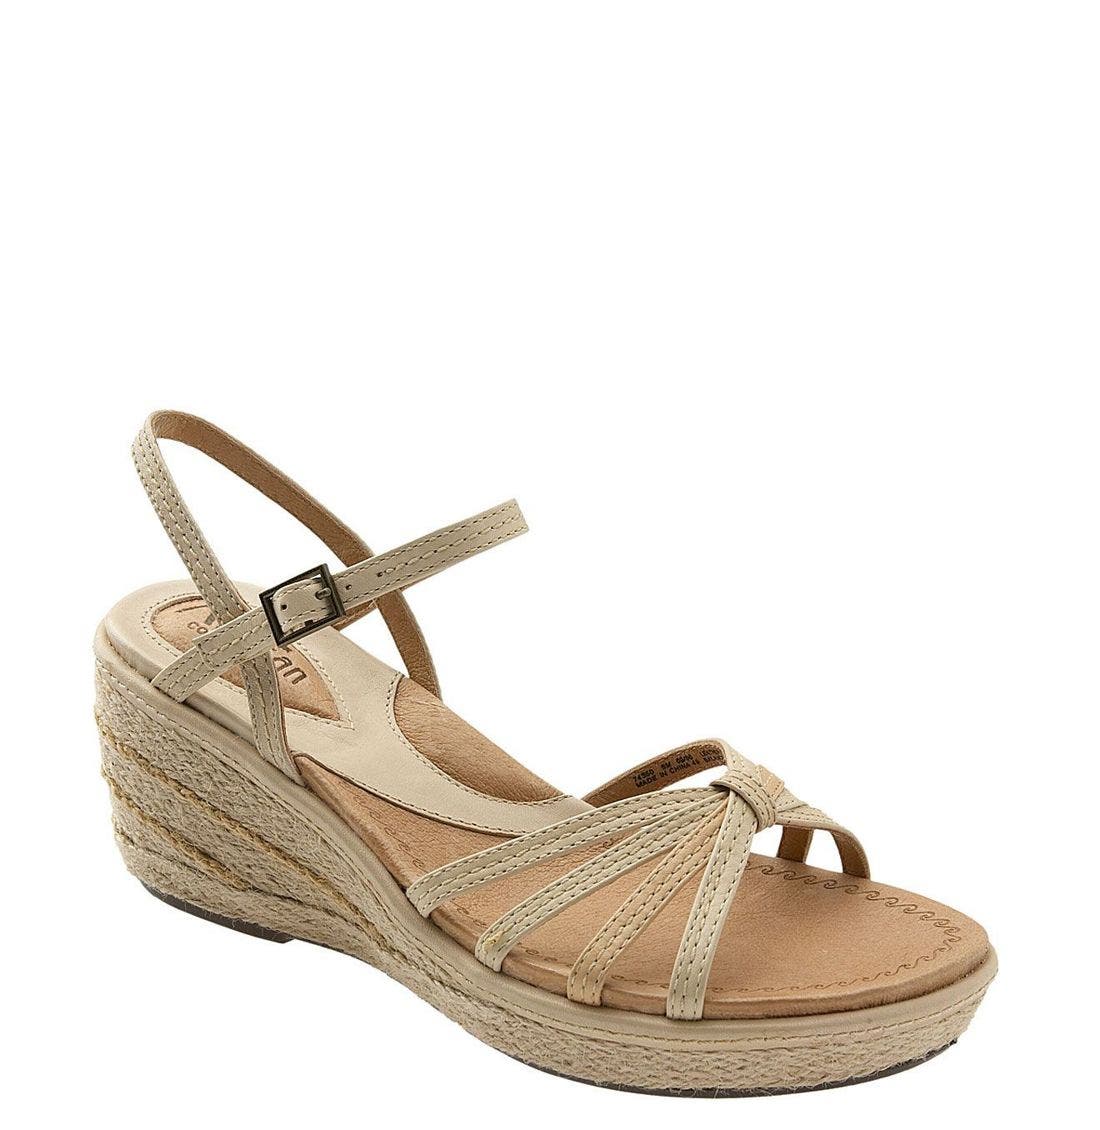 clarks artisan collection sandals